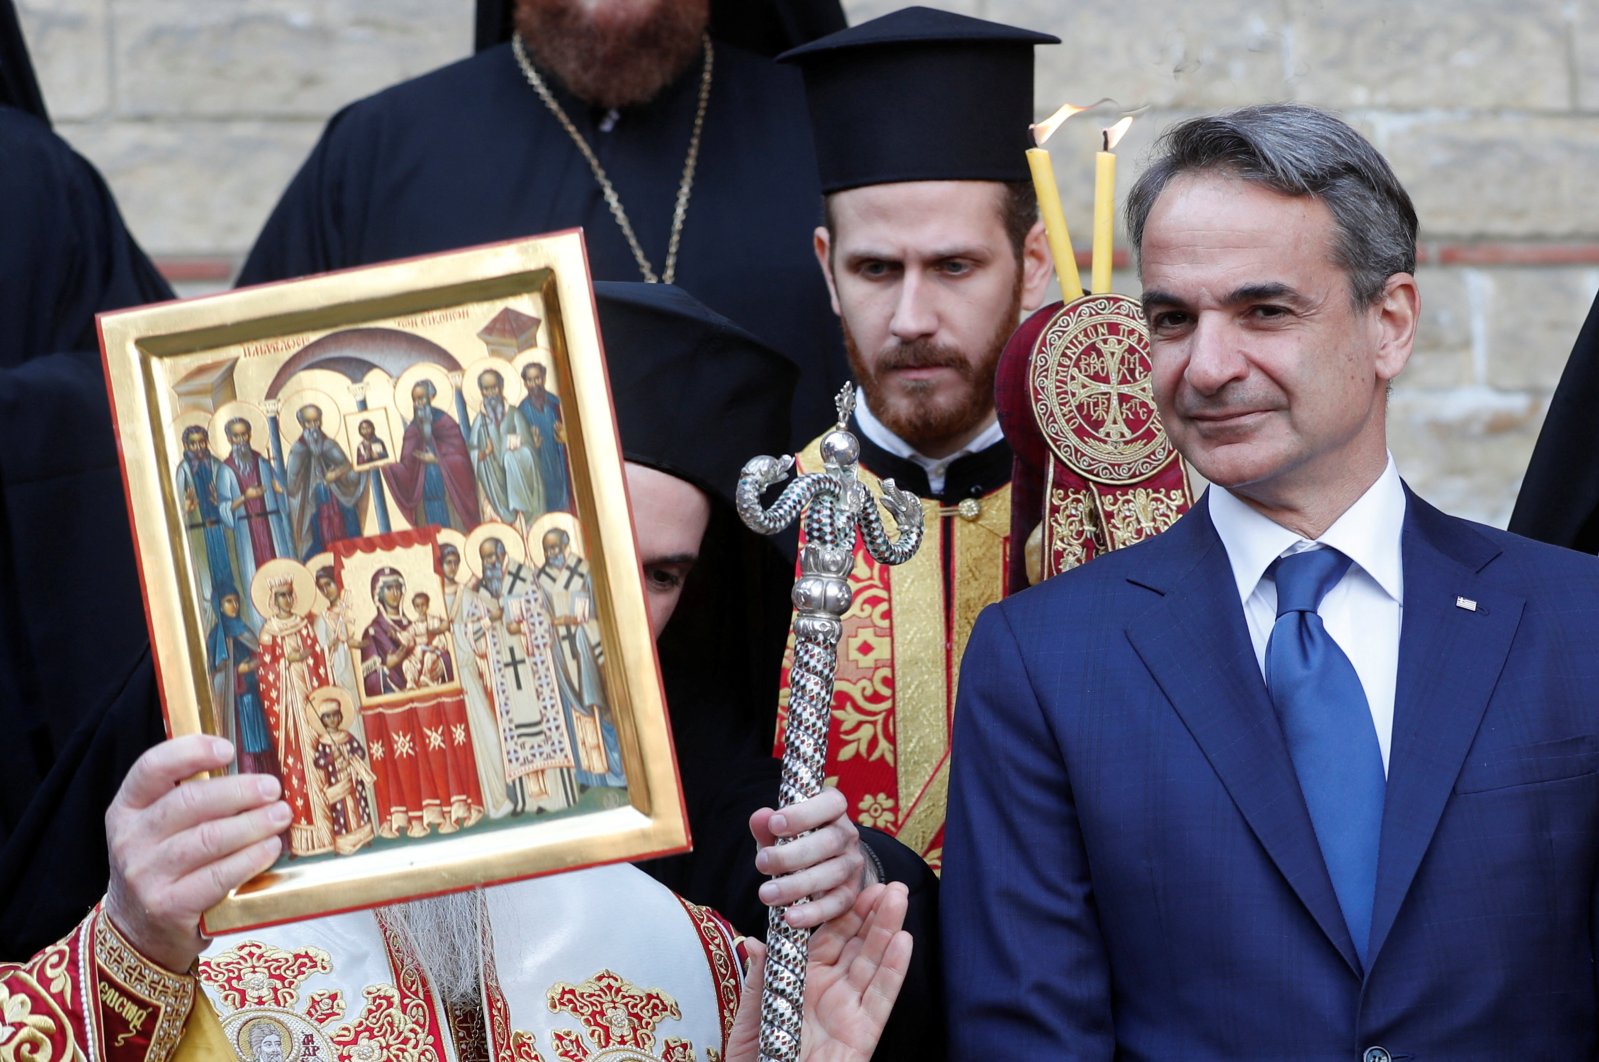 Ecumenical Patriarch Bartholomew I, the spiritual head of some 300 million Orthodox Christians worldwide, holds an icon as Greek Prime Minister Kyriakos Mitsotakis looks on at the courtyard of the Ecumenical Patriarchate following a Sunday service in Istanbul, Turkey, March 13, 2022. (Reuters Photo)